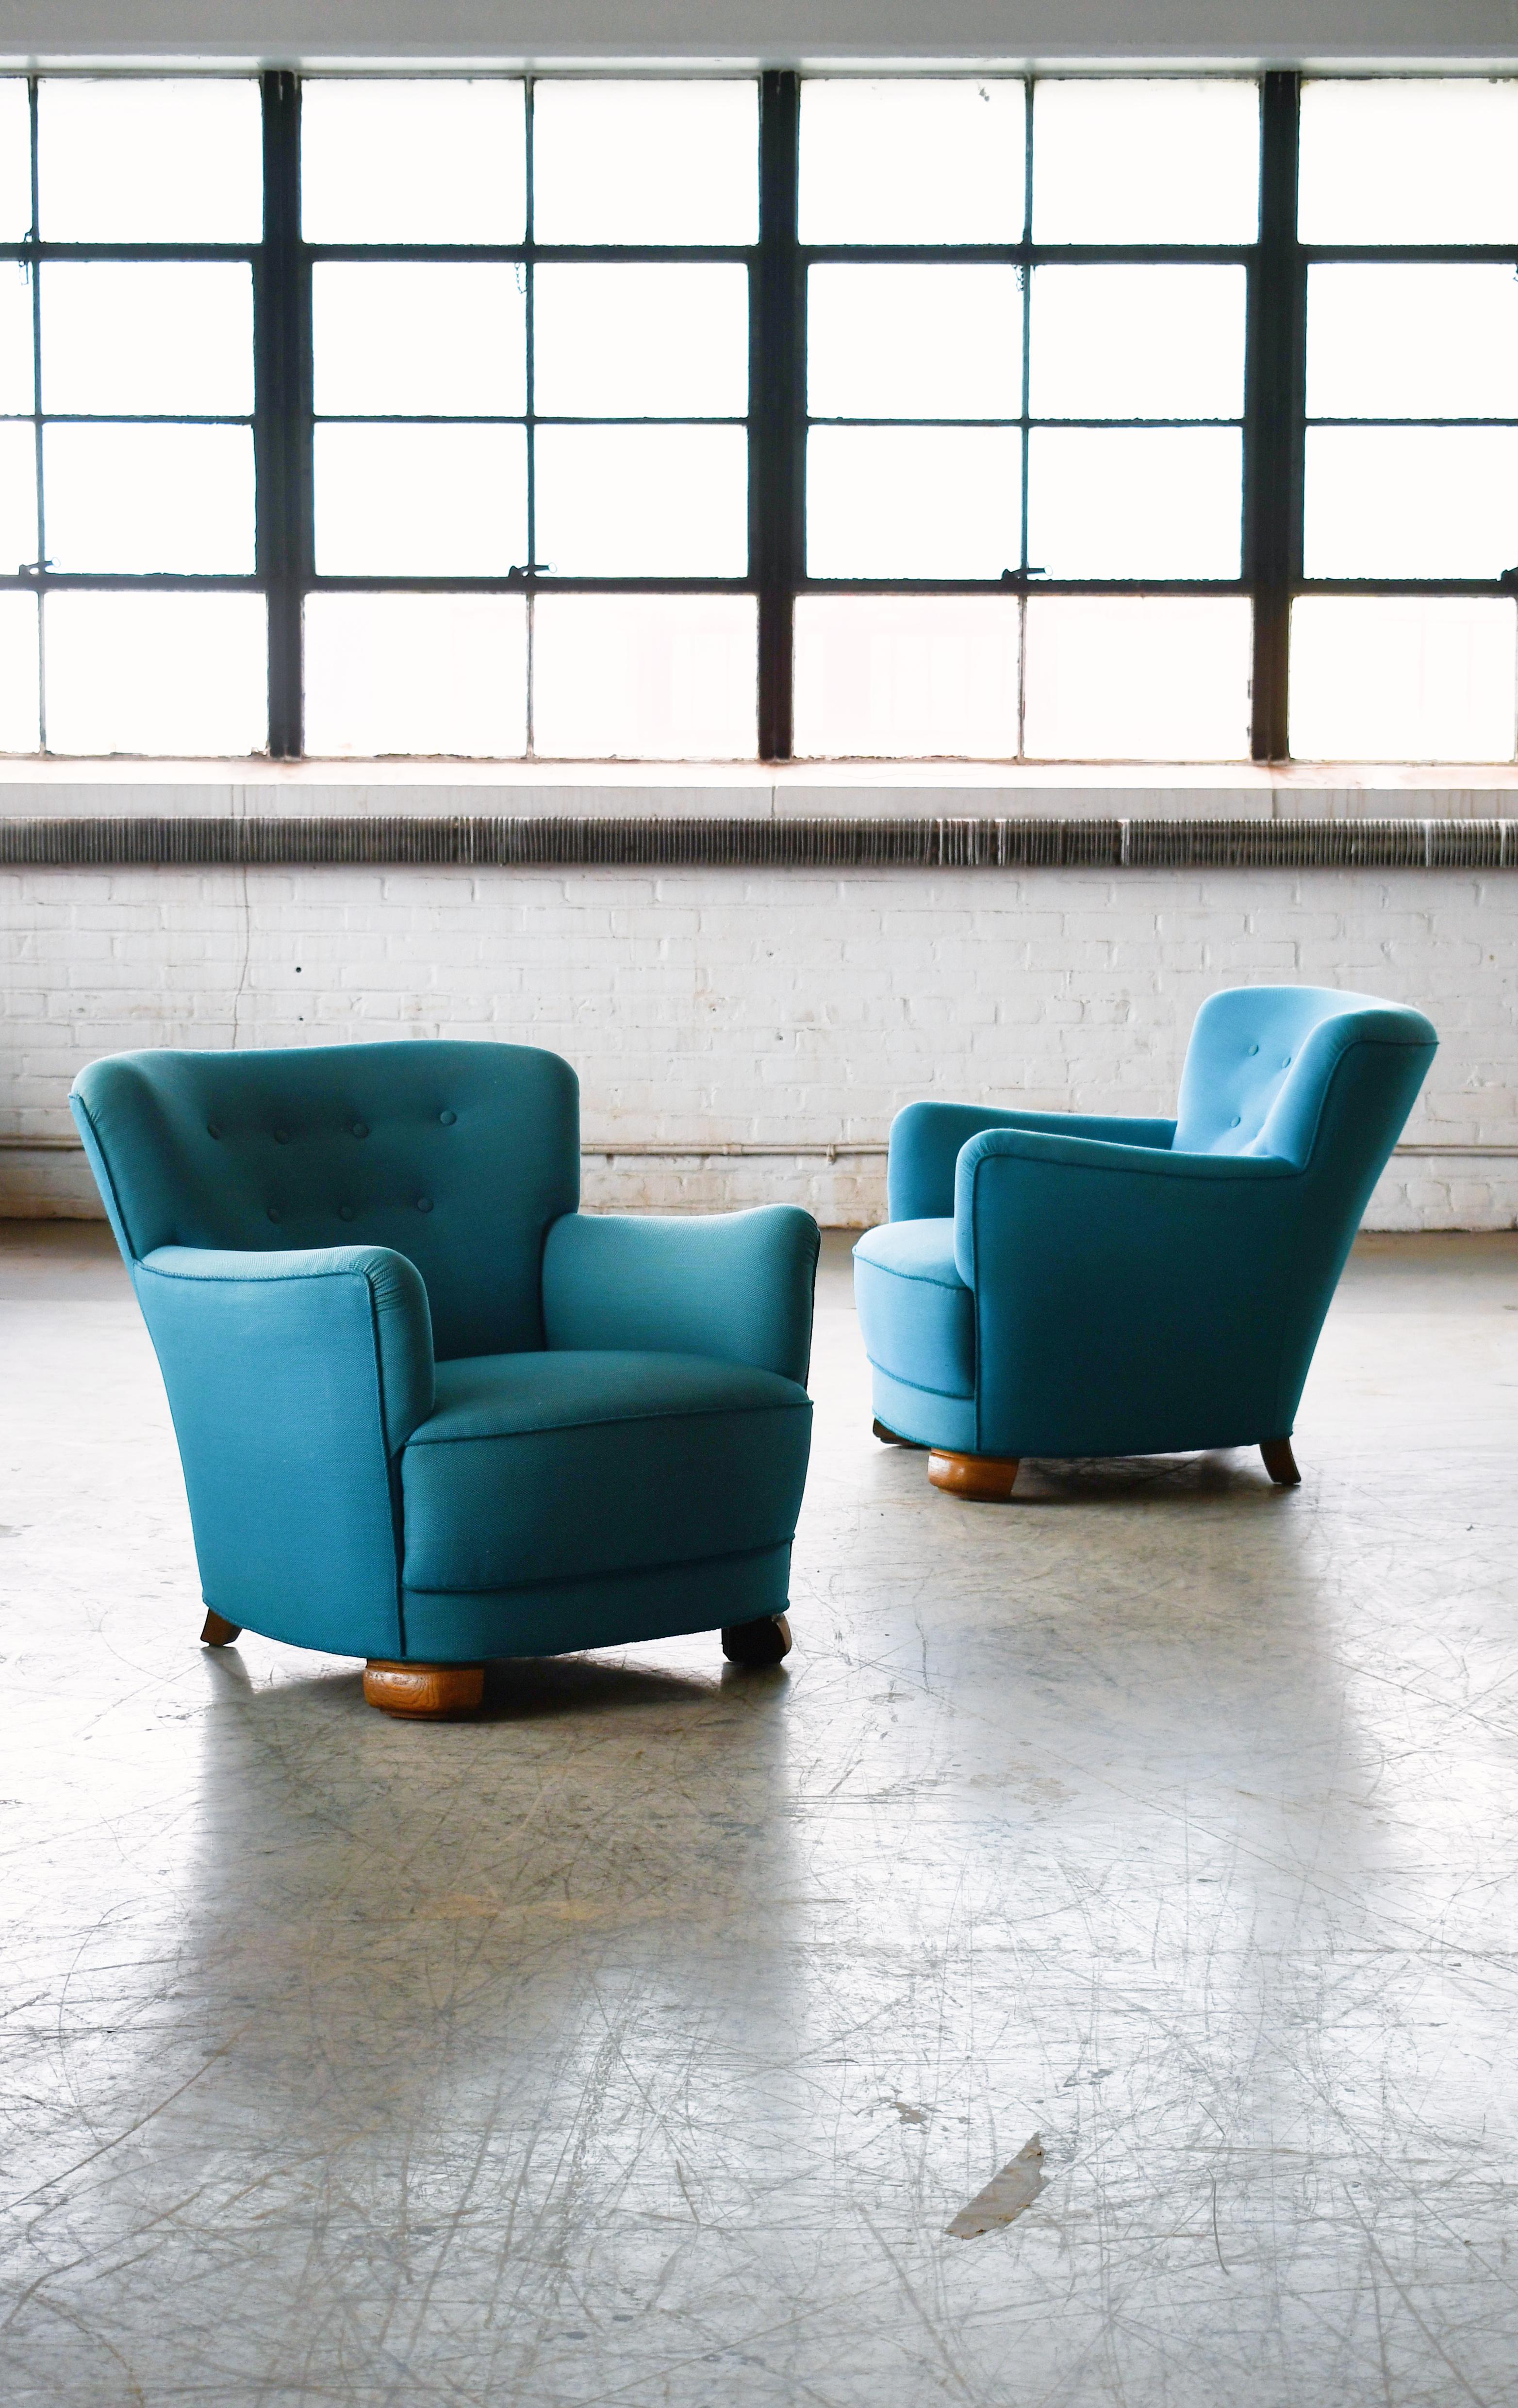 Pair of sublime mid-scale Danish club or lounge chair made in the 1940s. The chairs are very similar to Fritz Hansen's model 1518 but differs by having different legs and being slightly smaller in scale. These chairs are superbly comfortable with